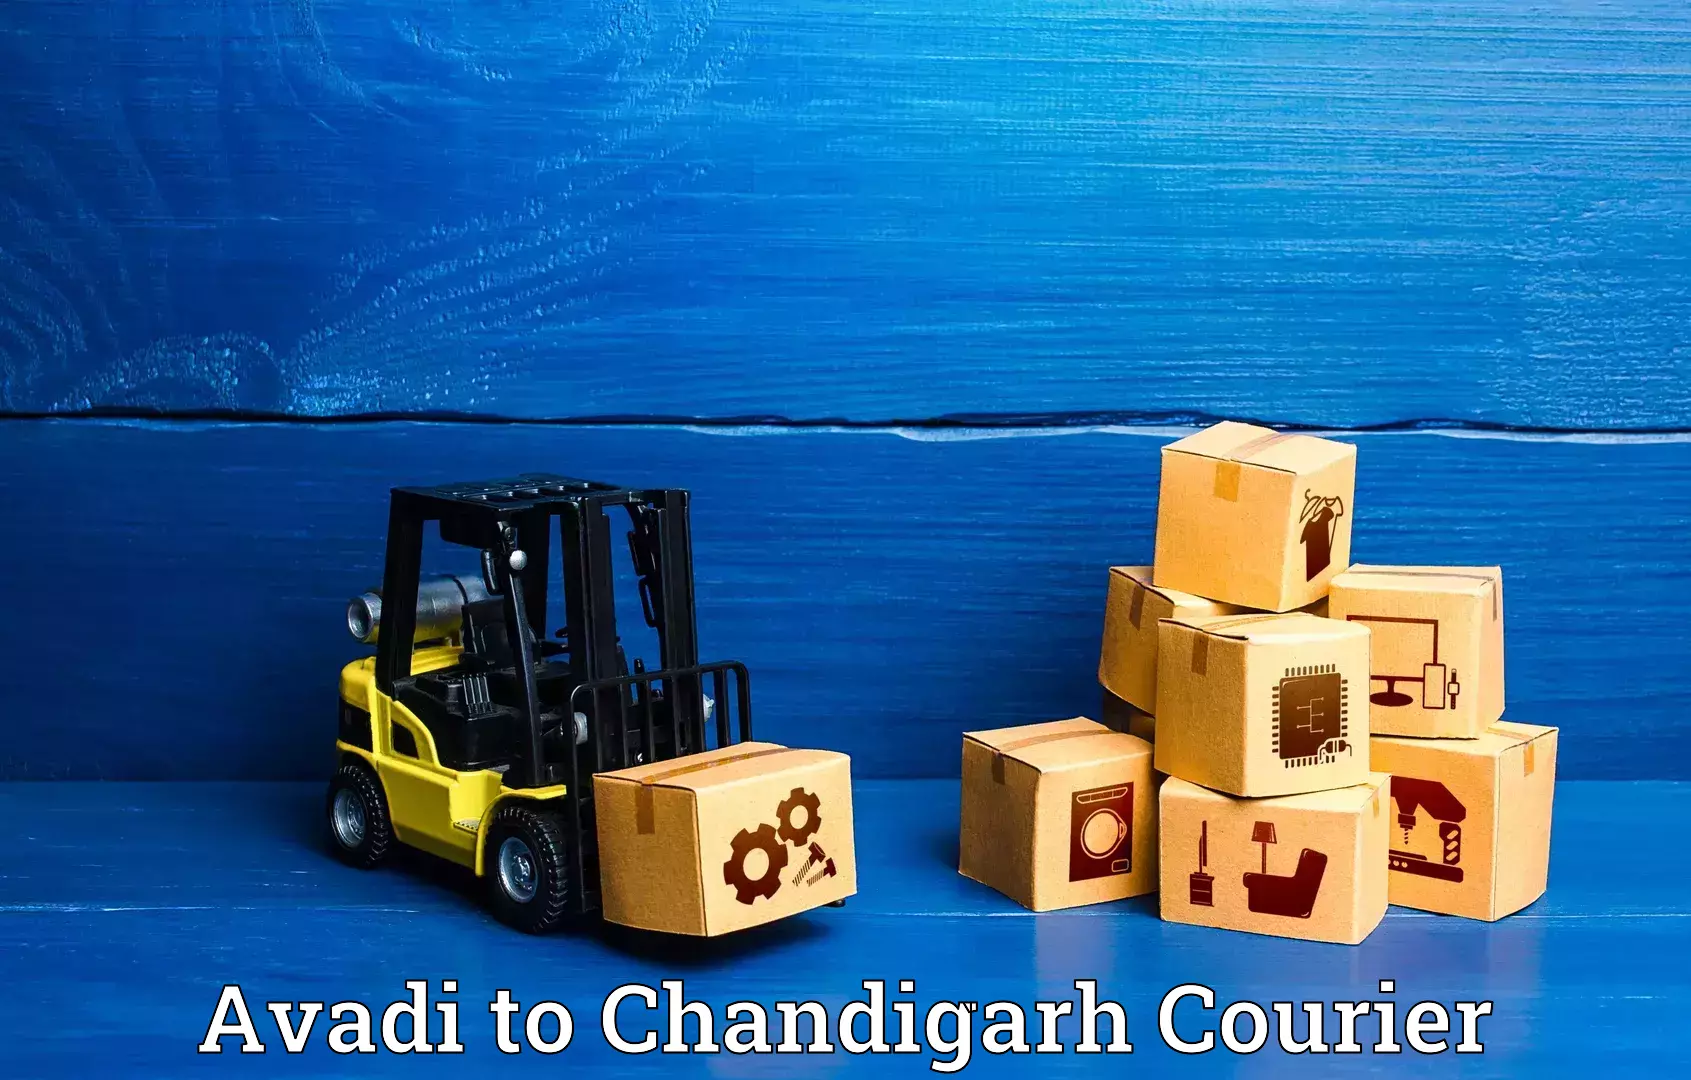 Customized luggage delivery Avadi to Chandigarh